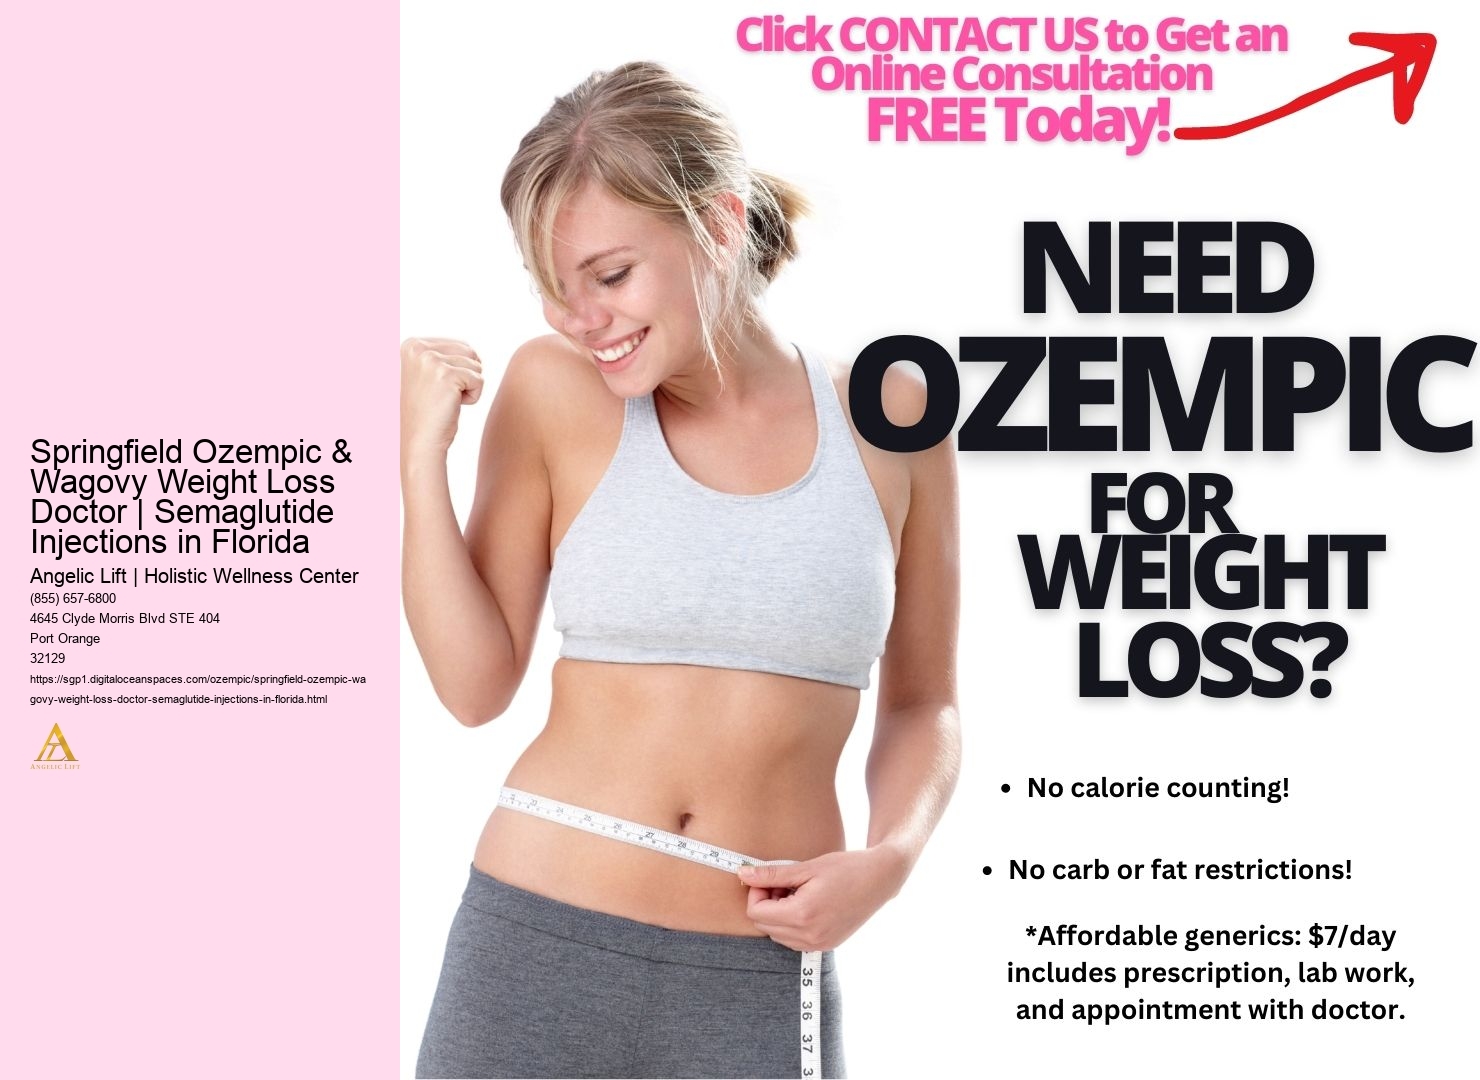 Springfield Ozempic & Wagovy Weight Loss Doctor | Semaglutide Injections in Florida